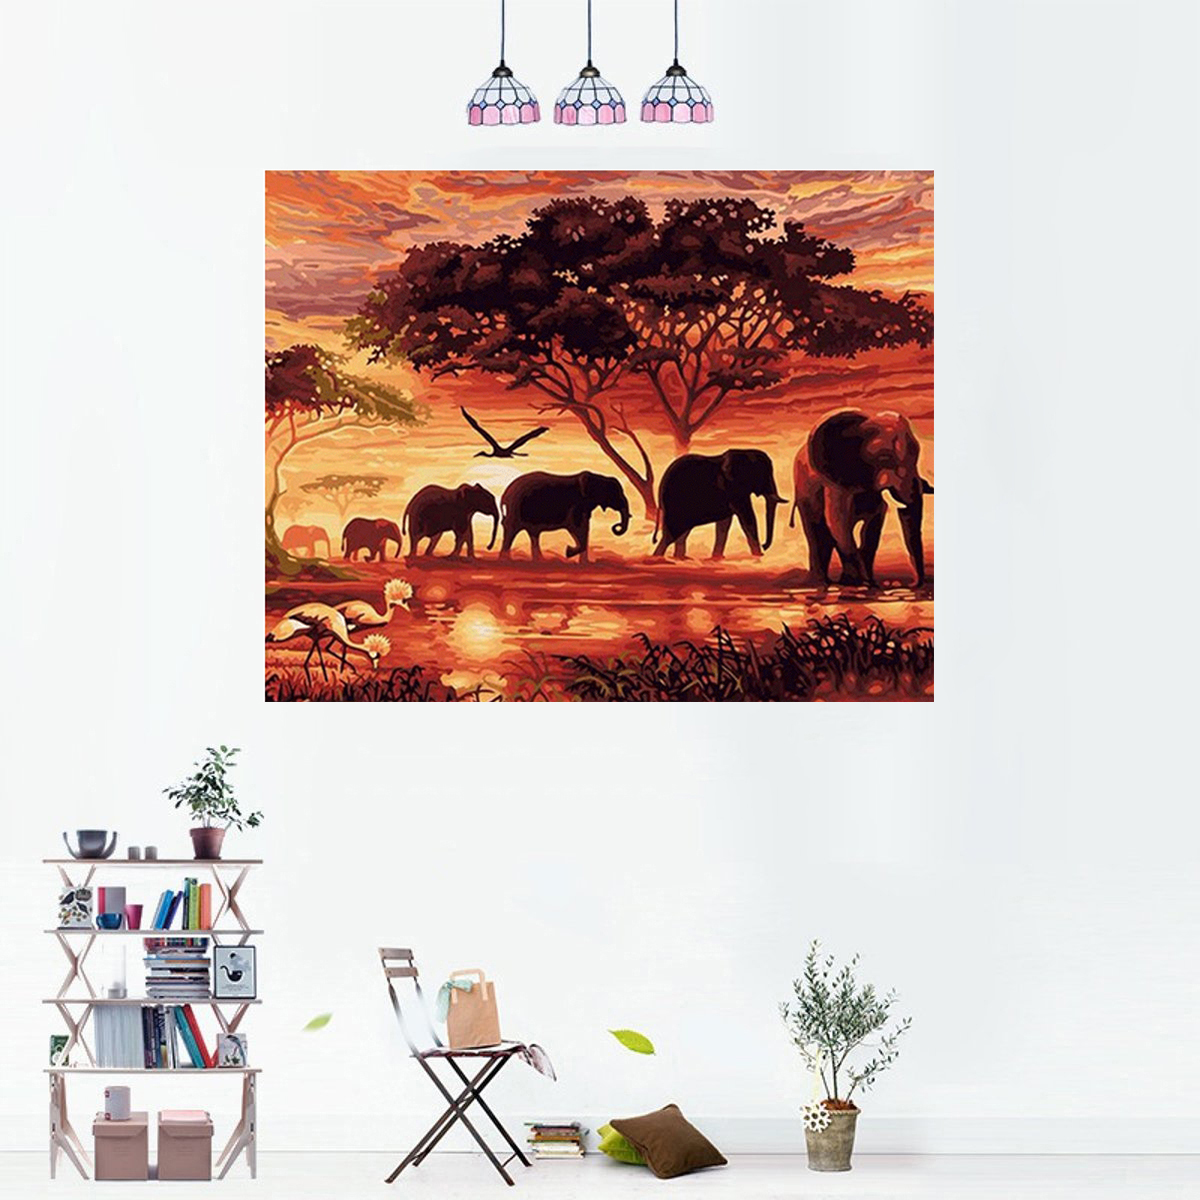 DIY-Diamond-Painting-Elephant-Scenery-Wall-Painting-Hanging-Pictures-Handmade-Wall-Decorations-Gifts-1744020-8